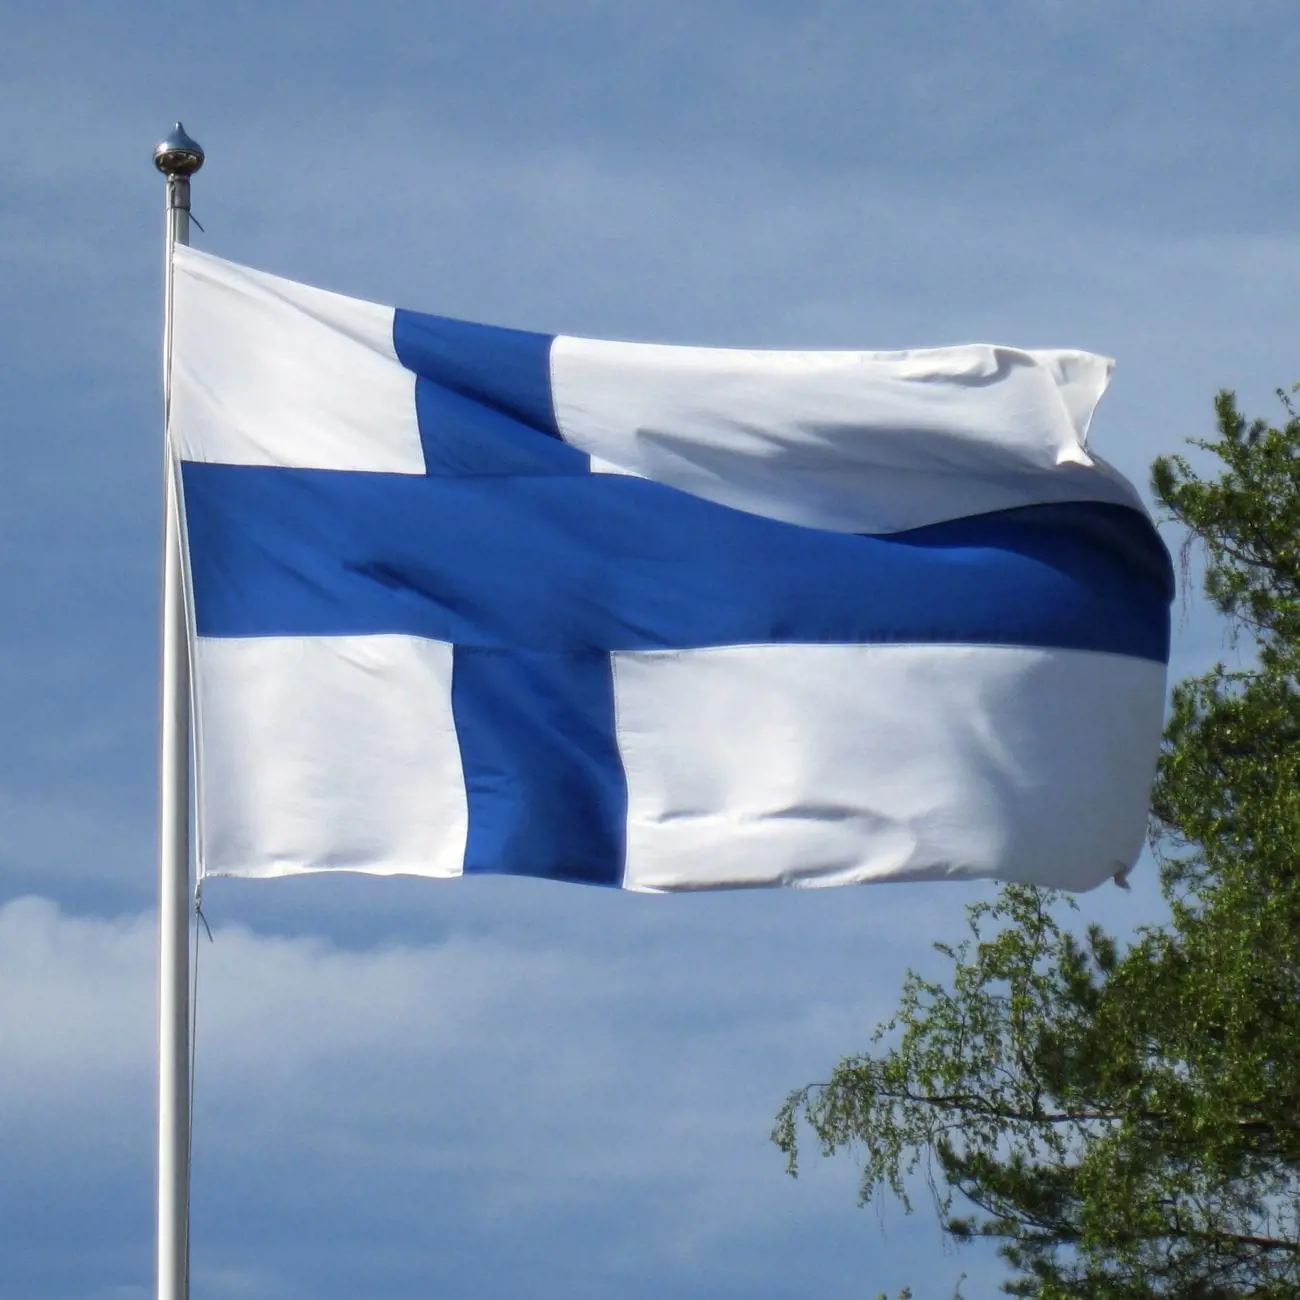 wind-flag-blue-nordic-finnish-flag-of-finland-1124576-pxhere.com1_-scaled